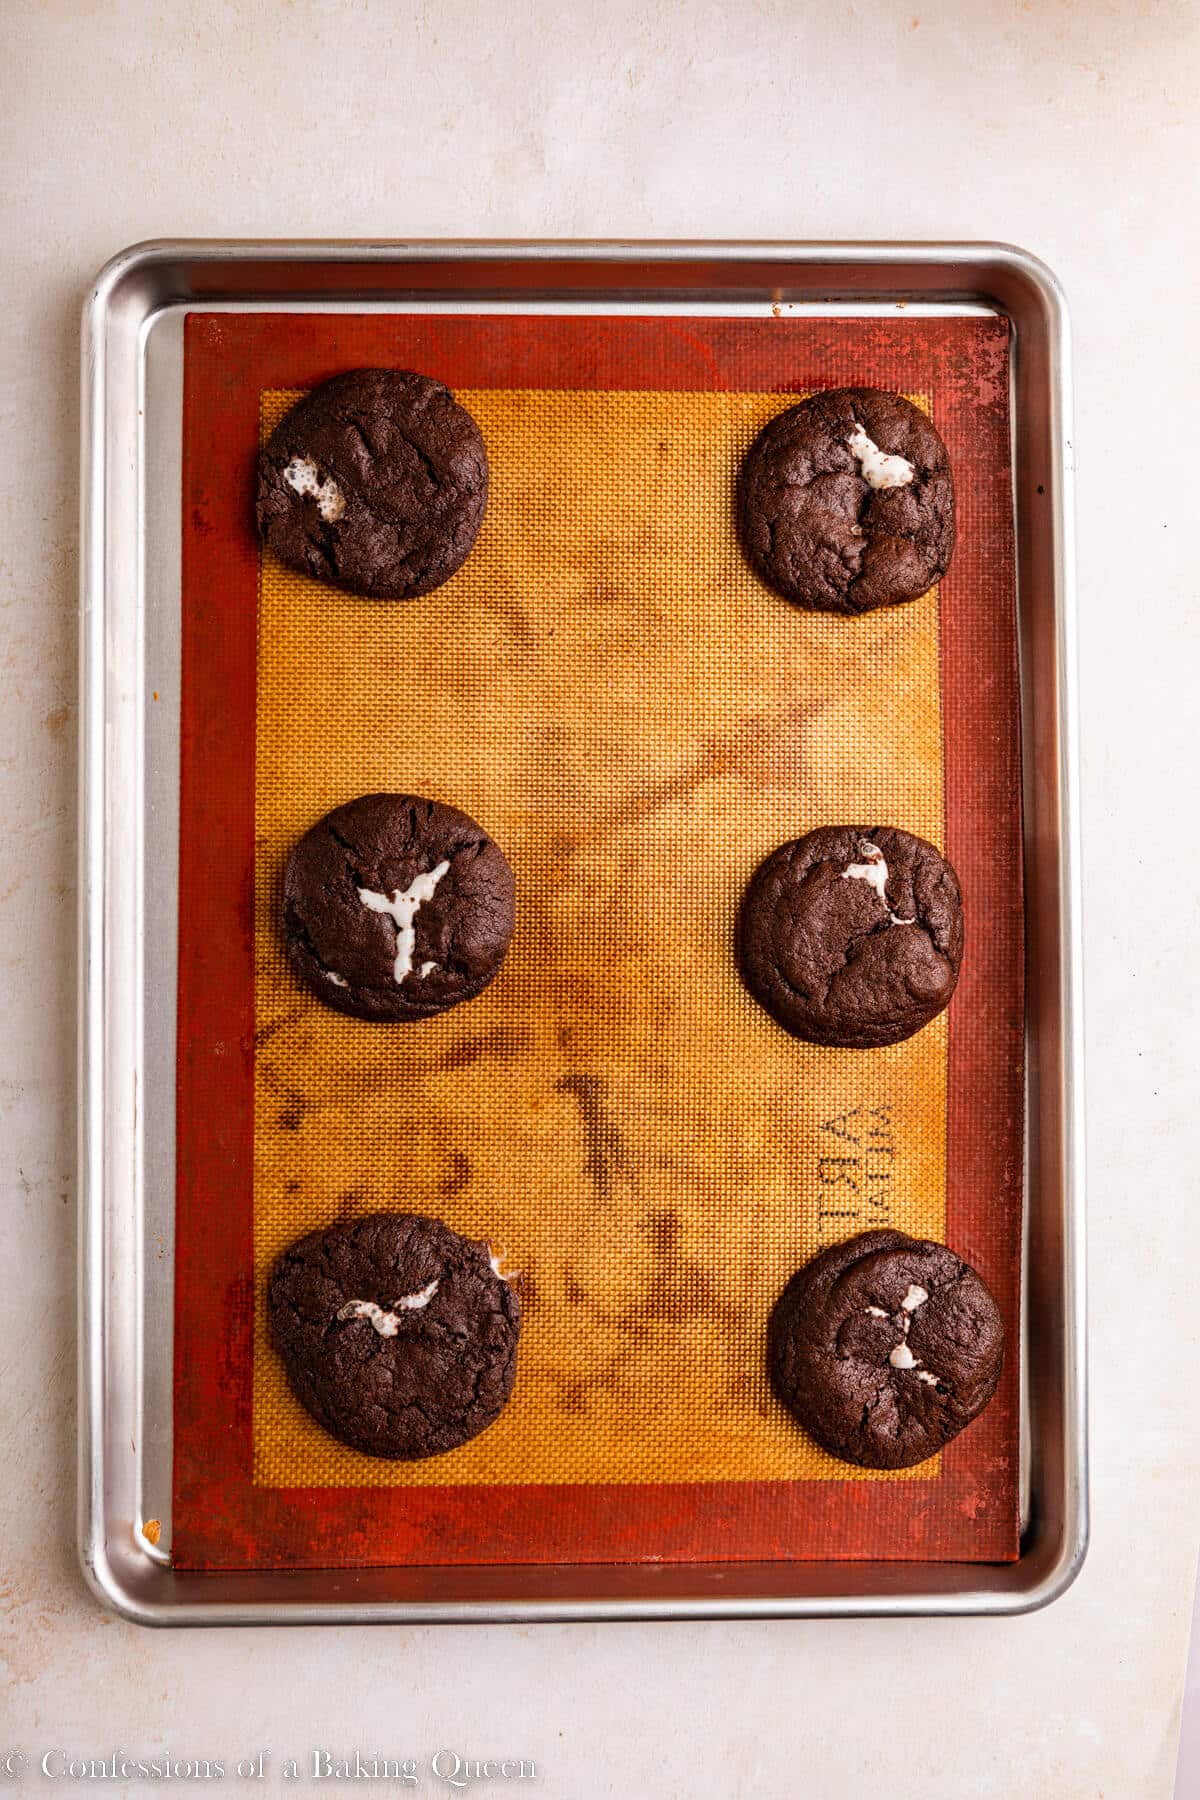 chocolate marshmallow cookies just baked on a silpat lined baking sheet on a light surface